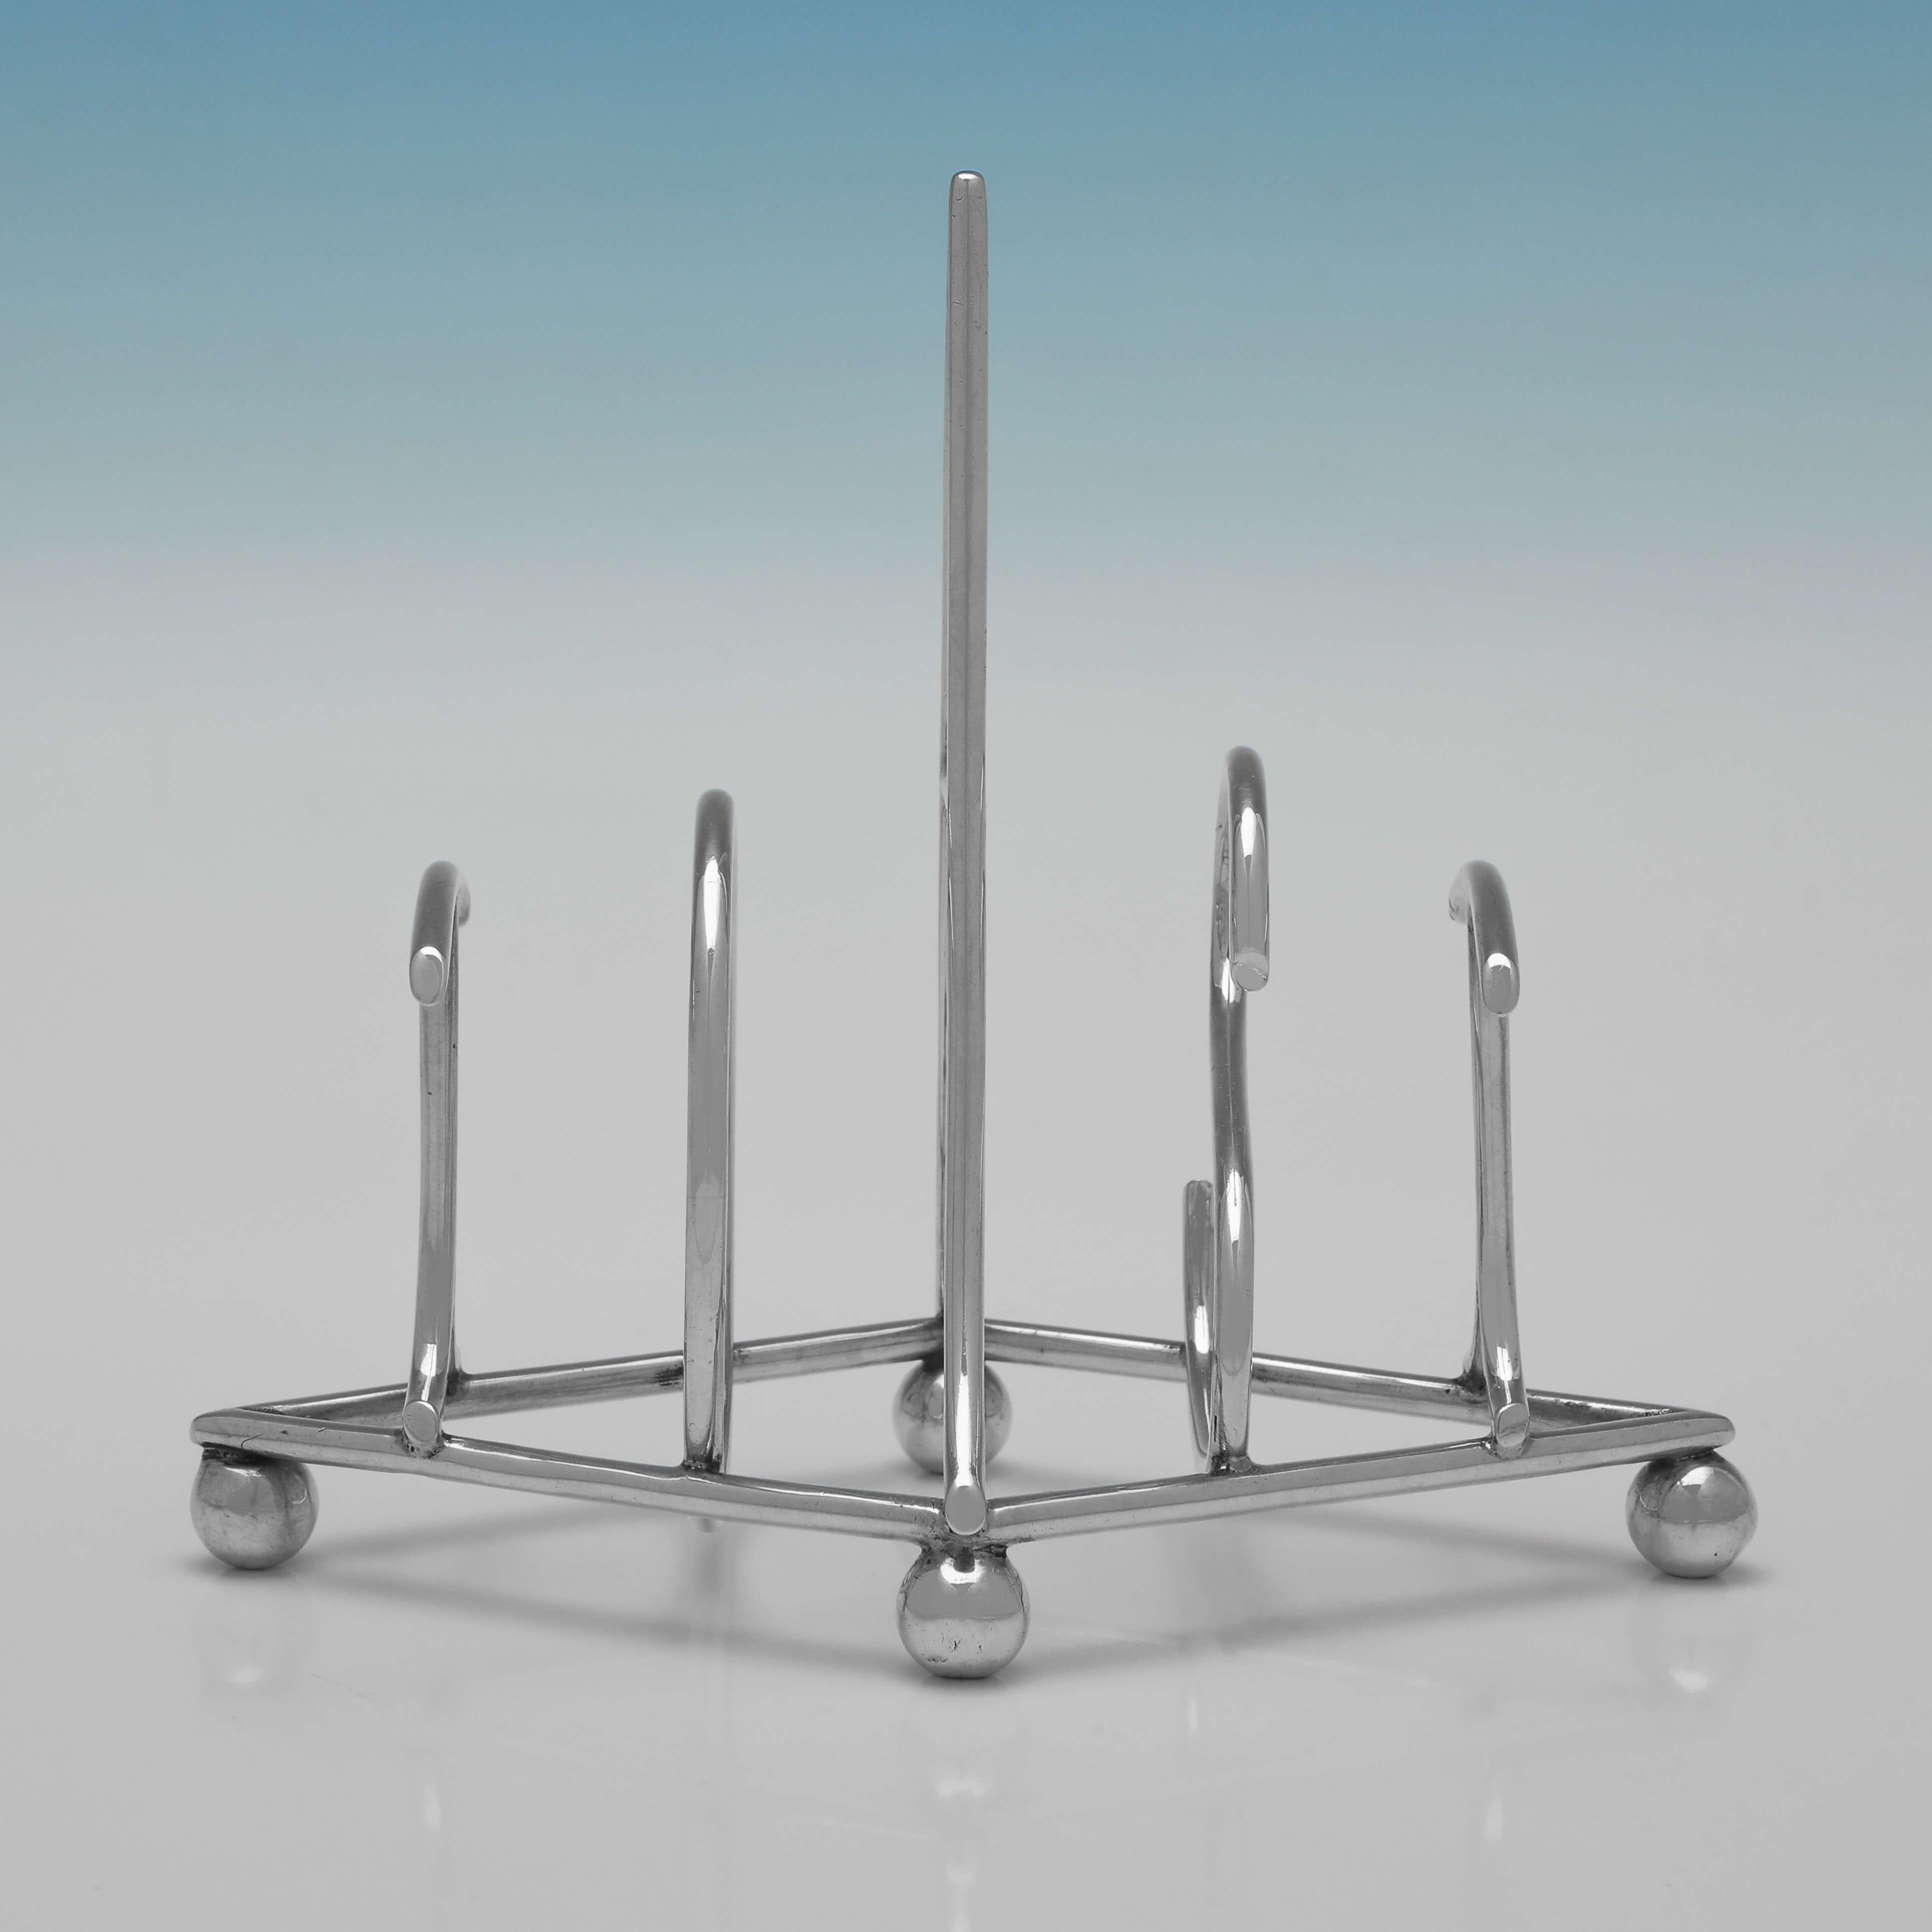 Hallmarked in London in 1904 by Heath & Middleton, this stylish, Edwardian, Antique Sterling Silver Toast Rack, is a novelty design where the bars to hold 4 pieces of toast spell out the word TOAST. 

The toast rack measures 5